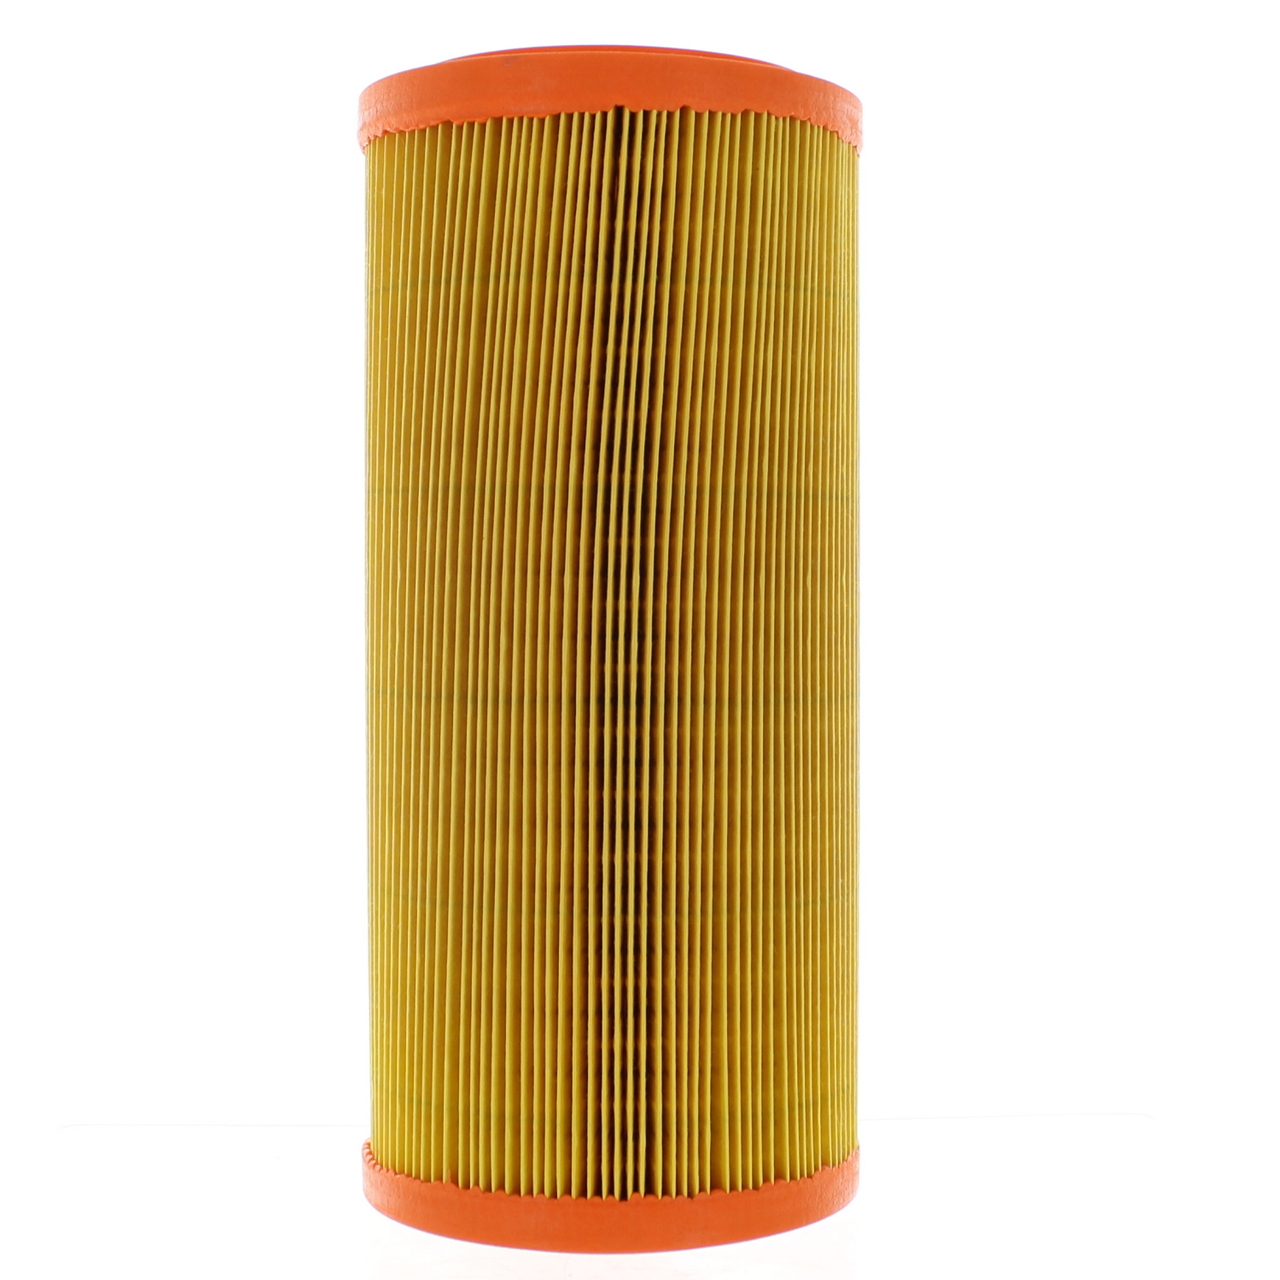 Product image for Air Filter Element